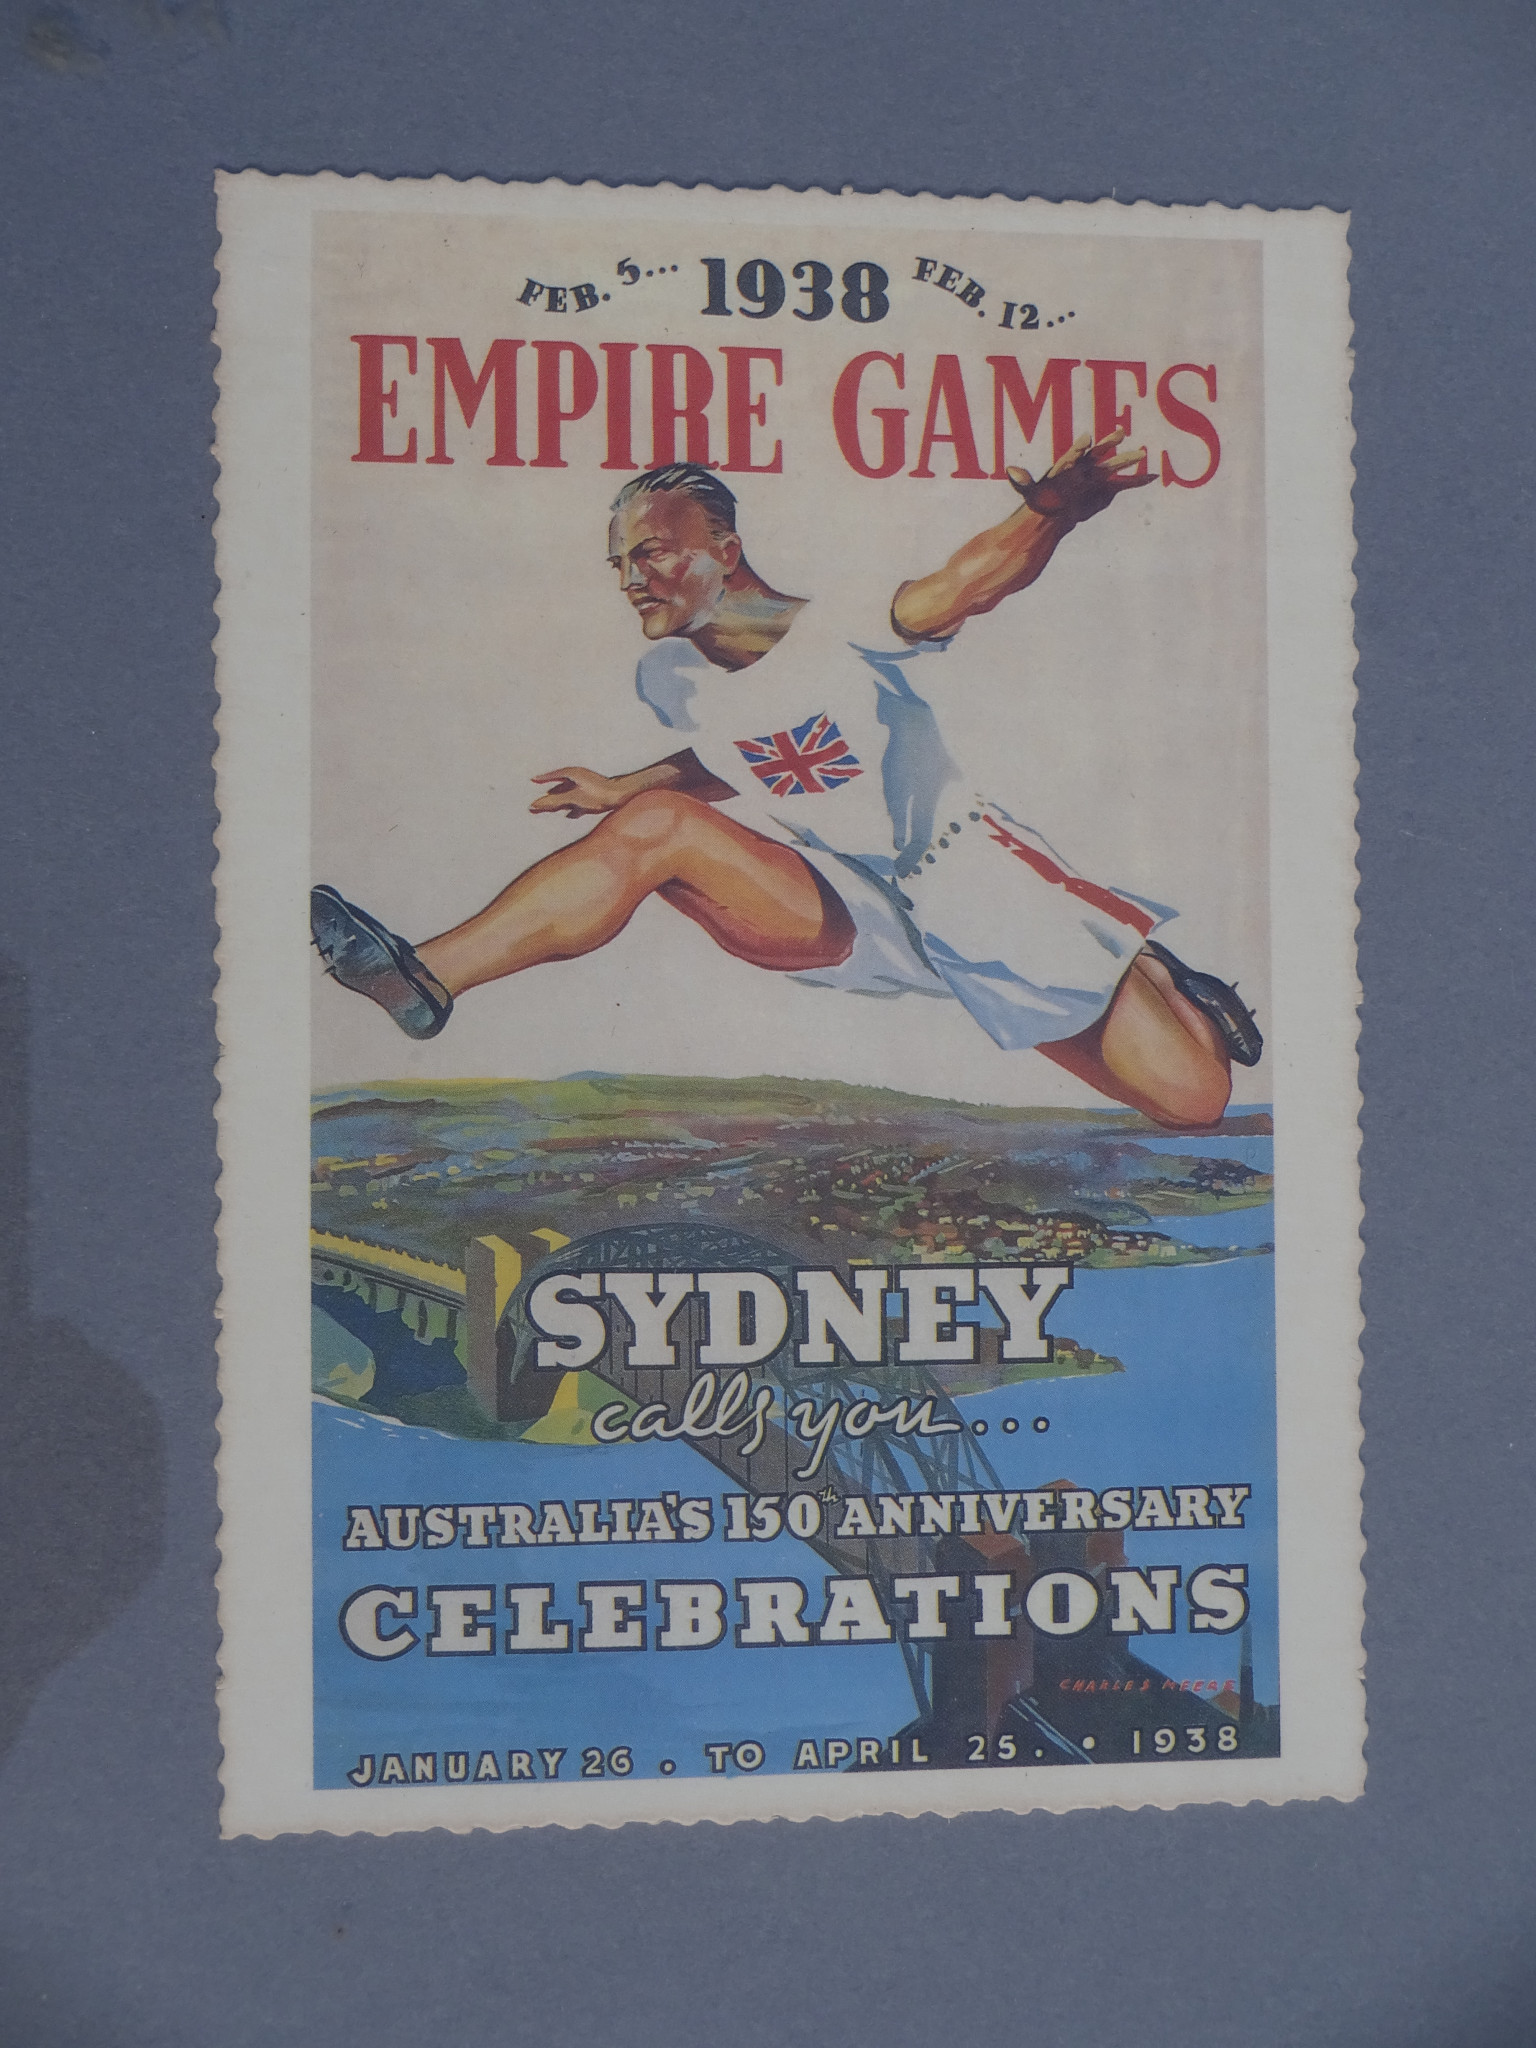 The 1938 British Empire Games in Sydney were held as an important part of the 150th anniversary of the first settlers arriving in Australia ©Philip Barker